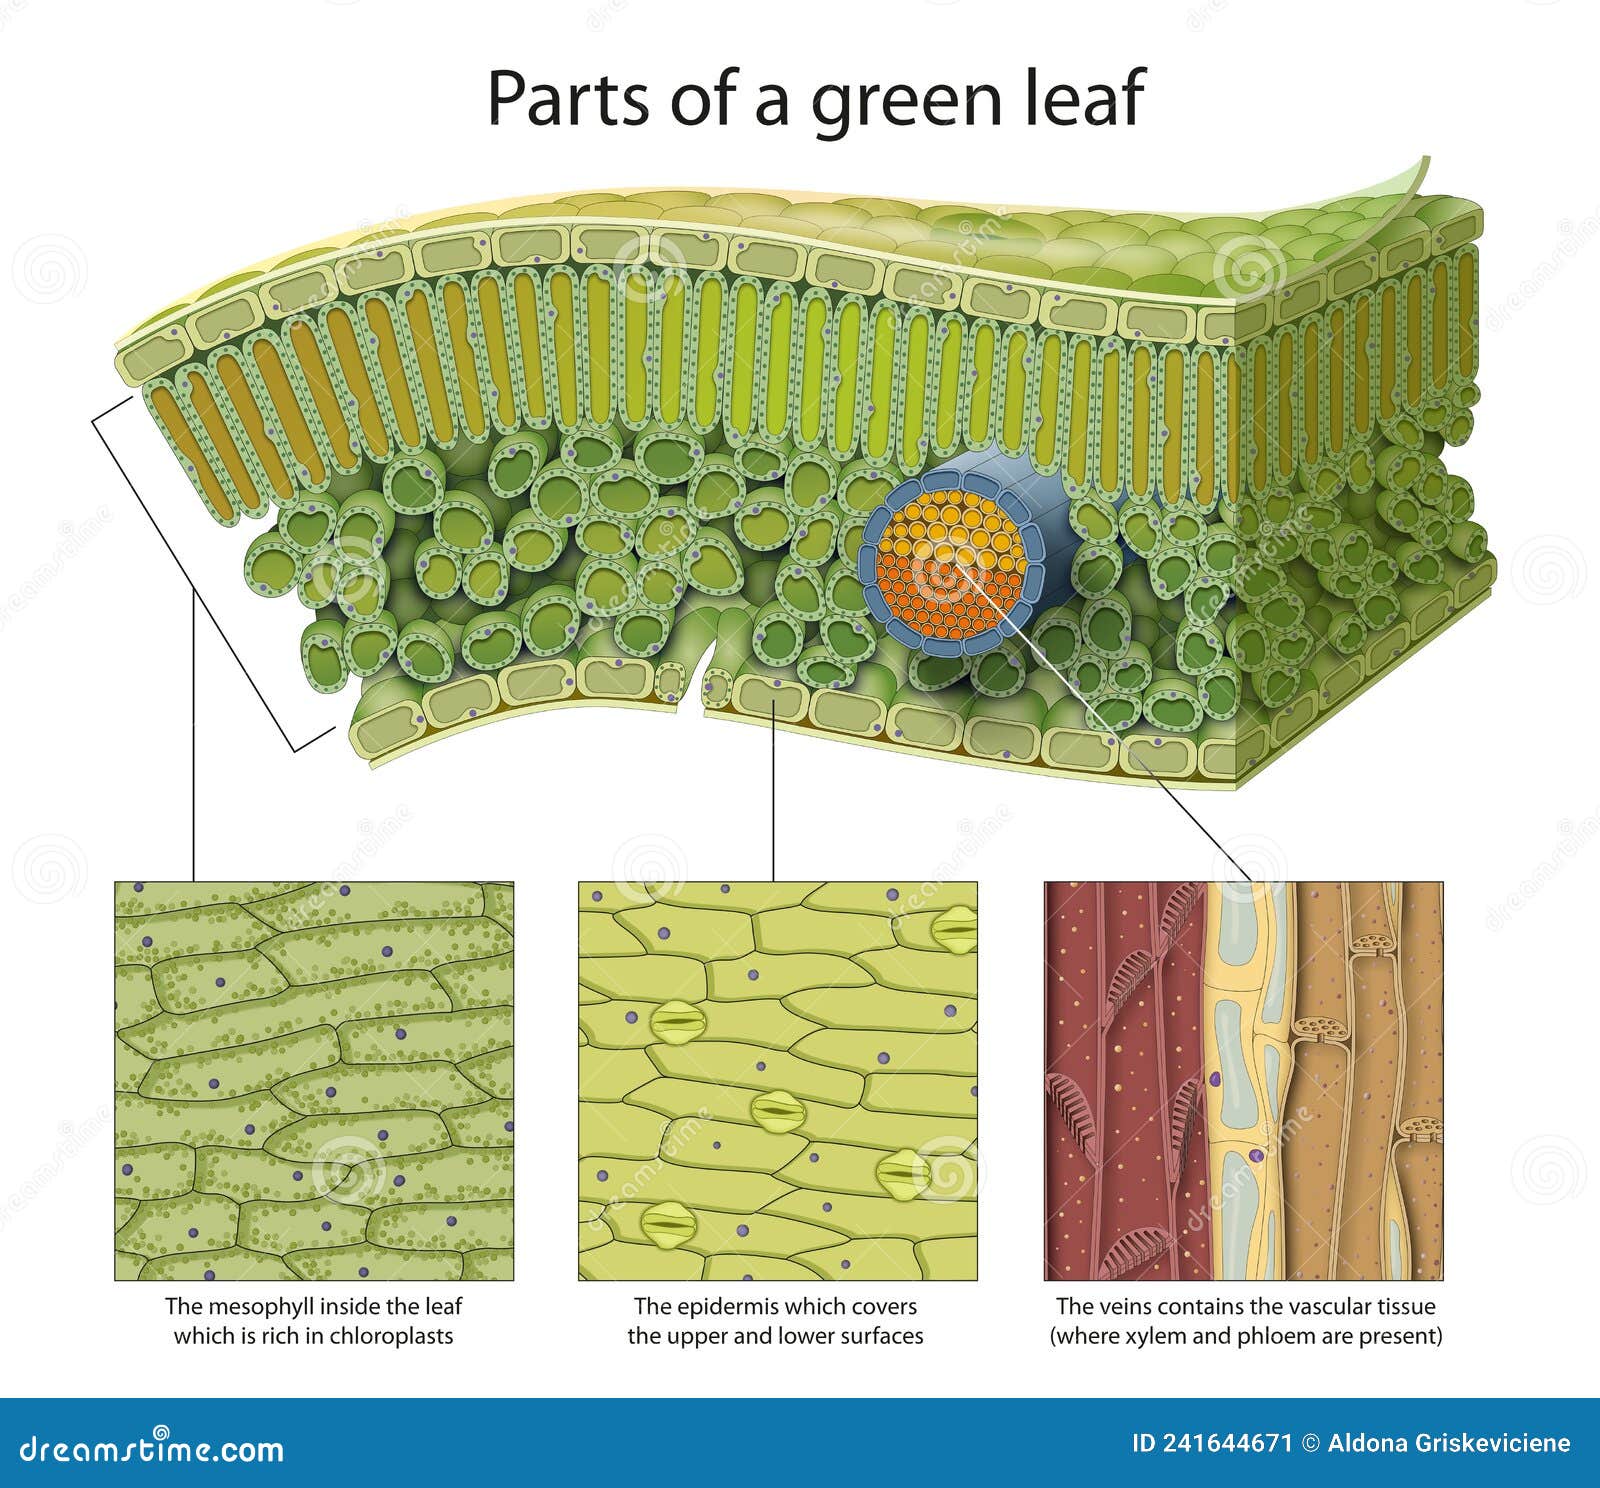 cellular structure of leaf. internal leaf structure a leaf is made of many layers that are sandwiched between two layers of tough